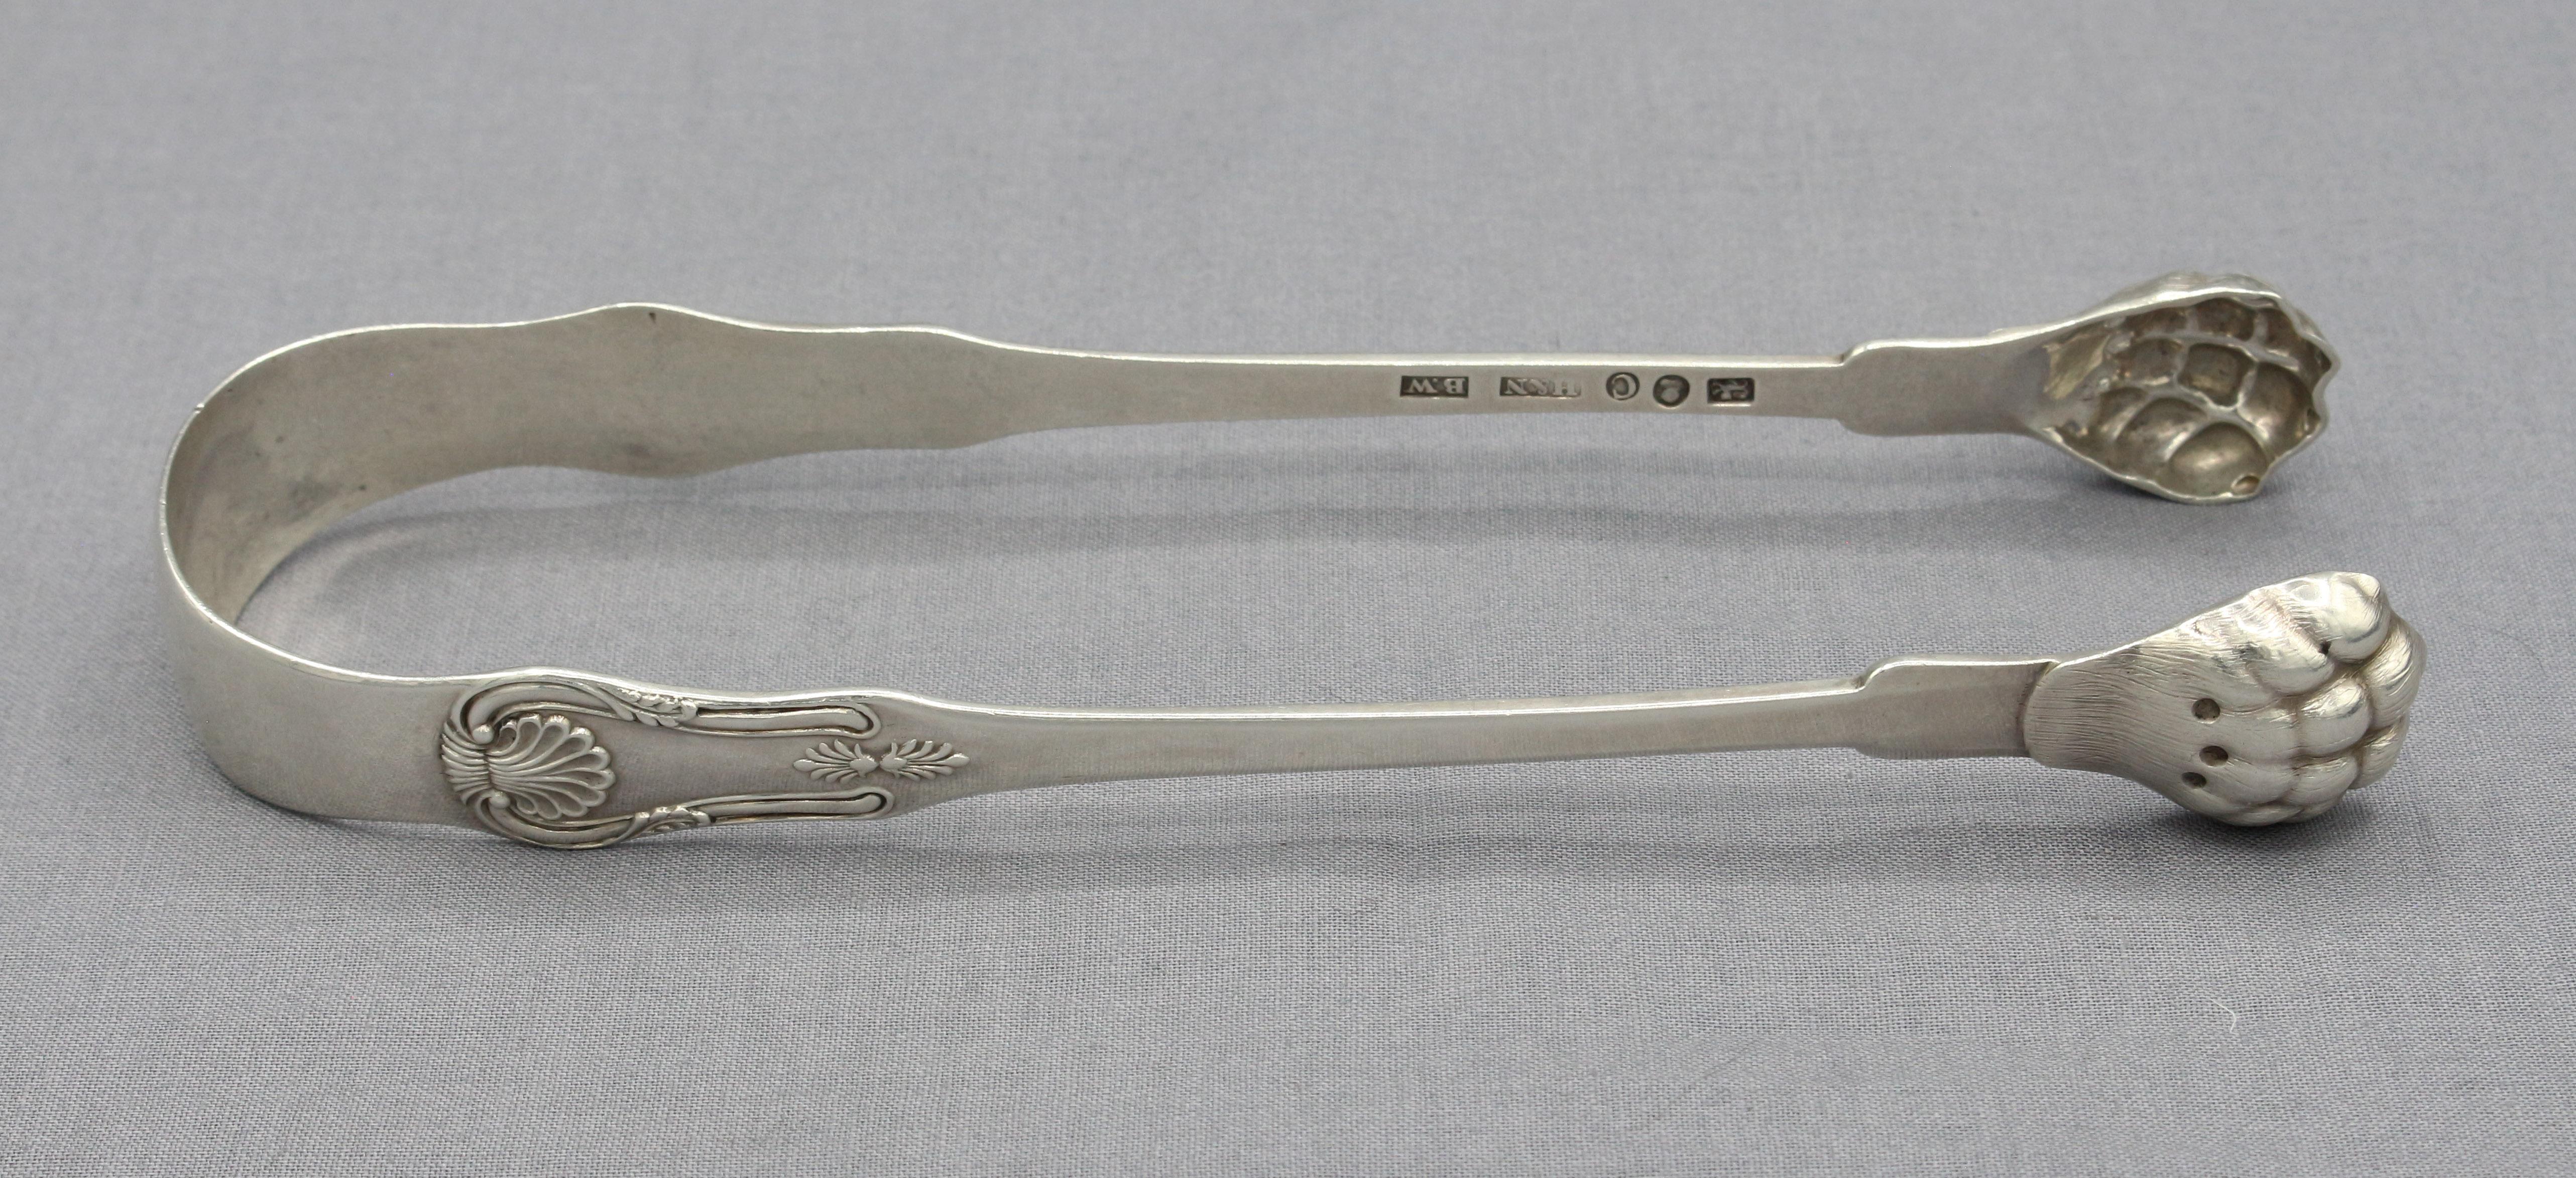 Fiddle shell pattern coin silver sugar tongs, circa 1815, American. Made by William Thompson, Henry Salisbury & George Eoff of NYC (lion, bust & C marks), retailed by Hyde & Nevins, New York. Exceptional quality with hairy paw ends. Also marked WB